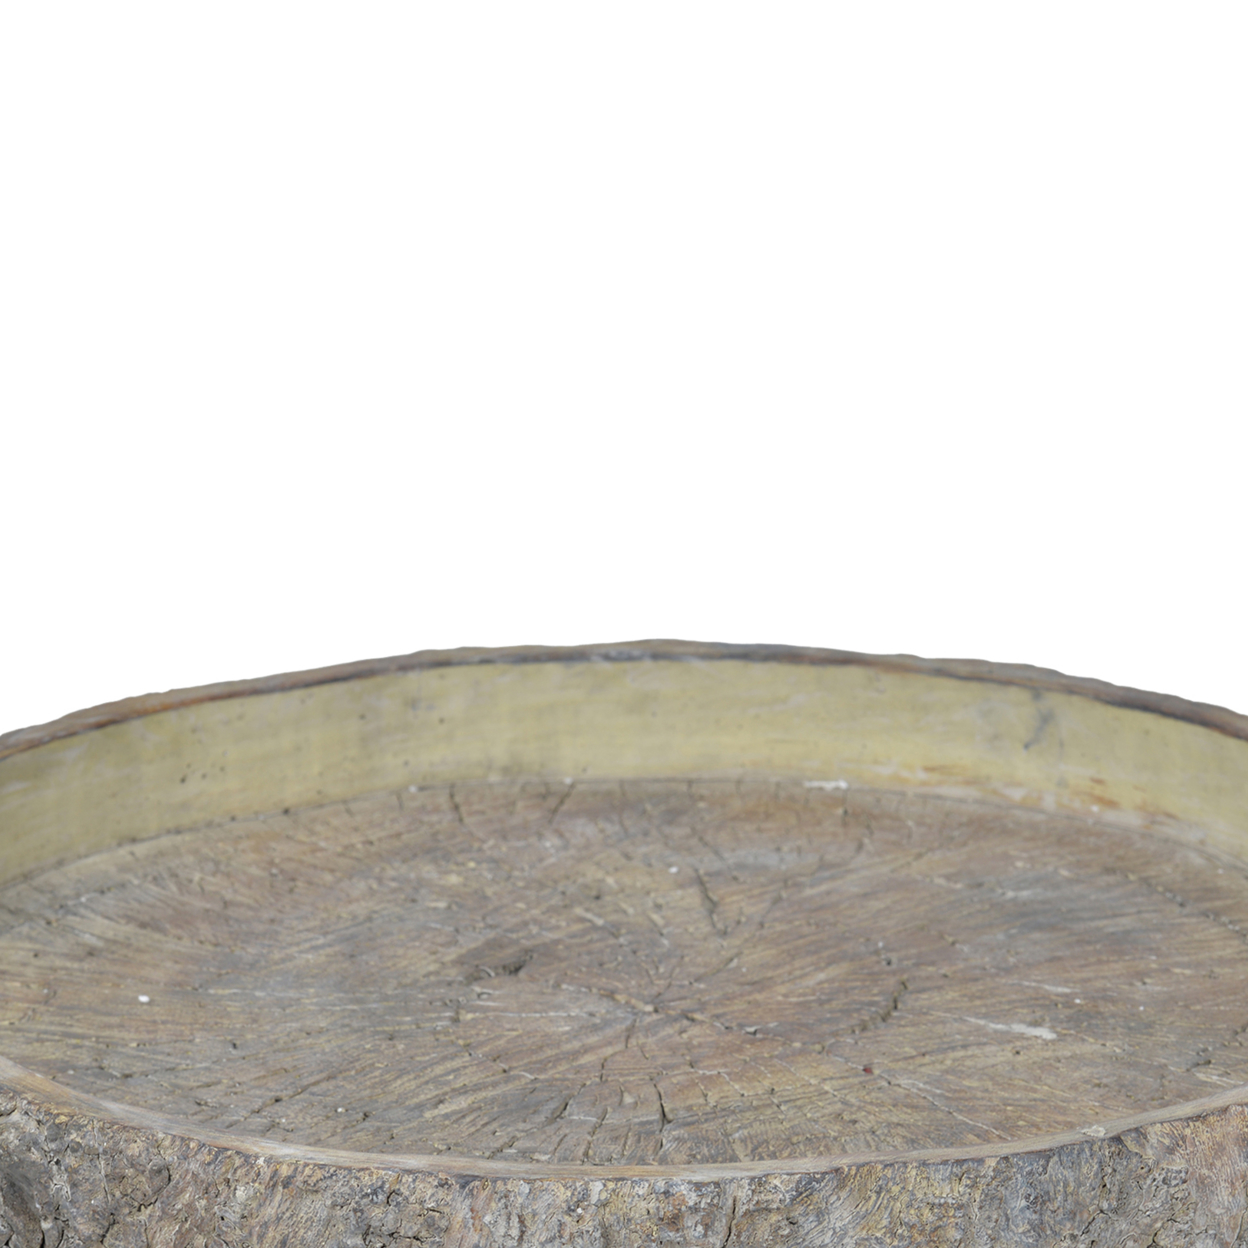 Decorative Cemented Log Plate With Distressed Details, Gray- Saltoro Sherpi